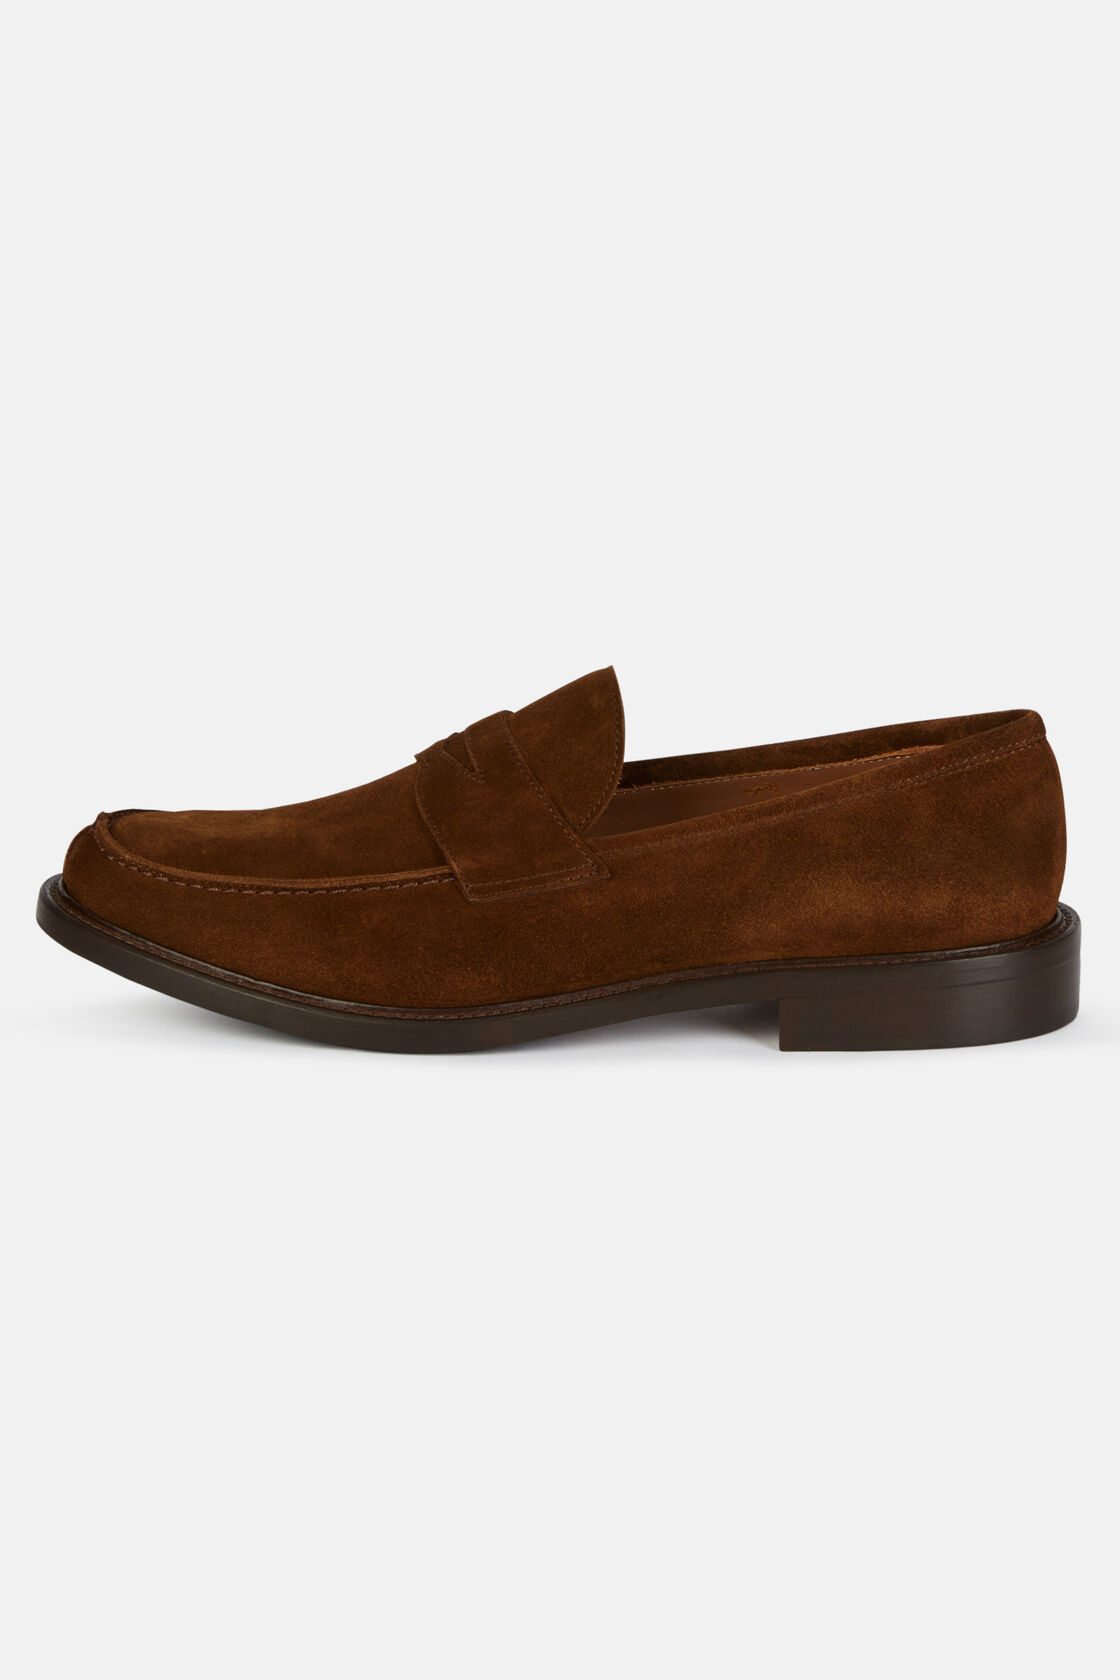 Suede Leather Loafers, Brown, hi-res